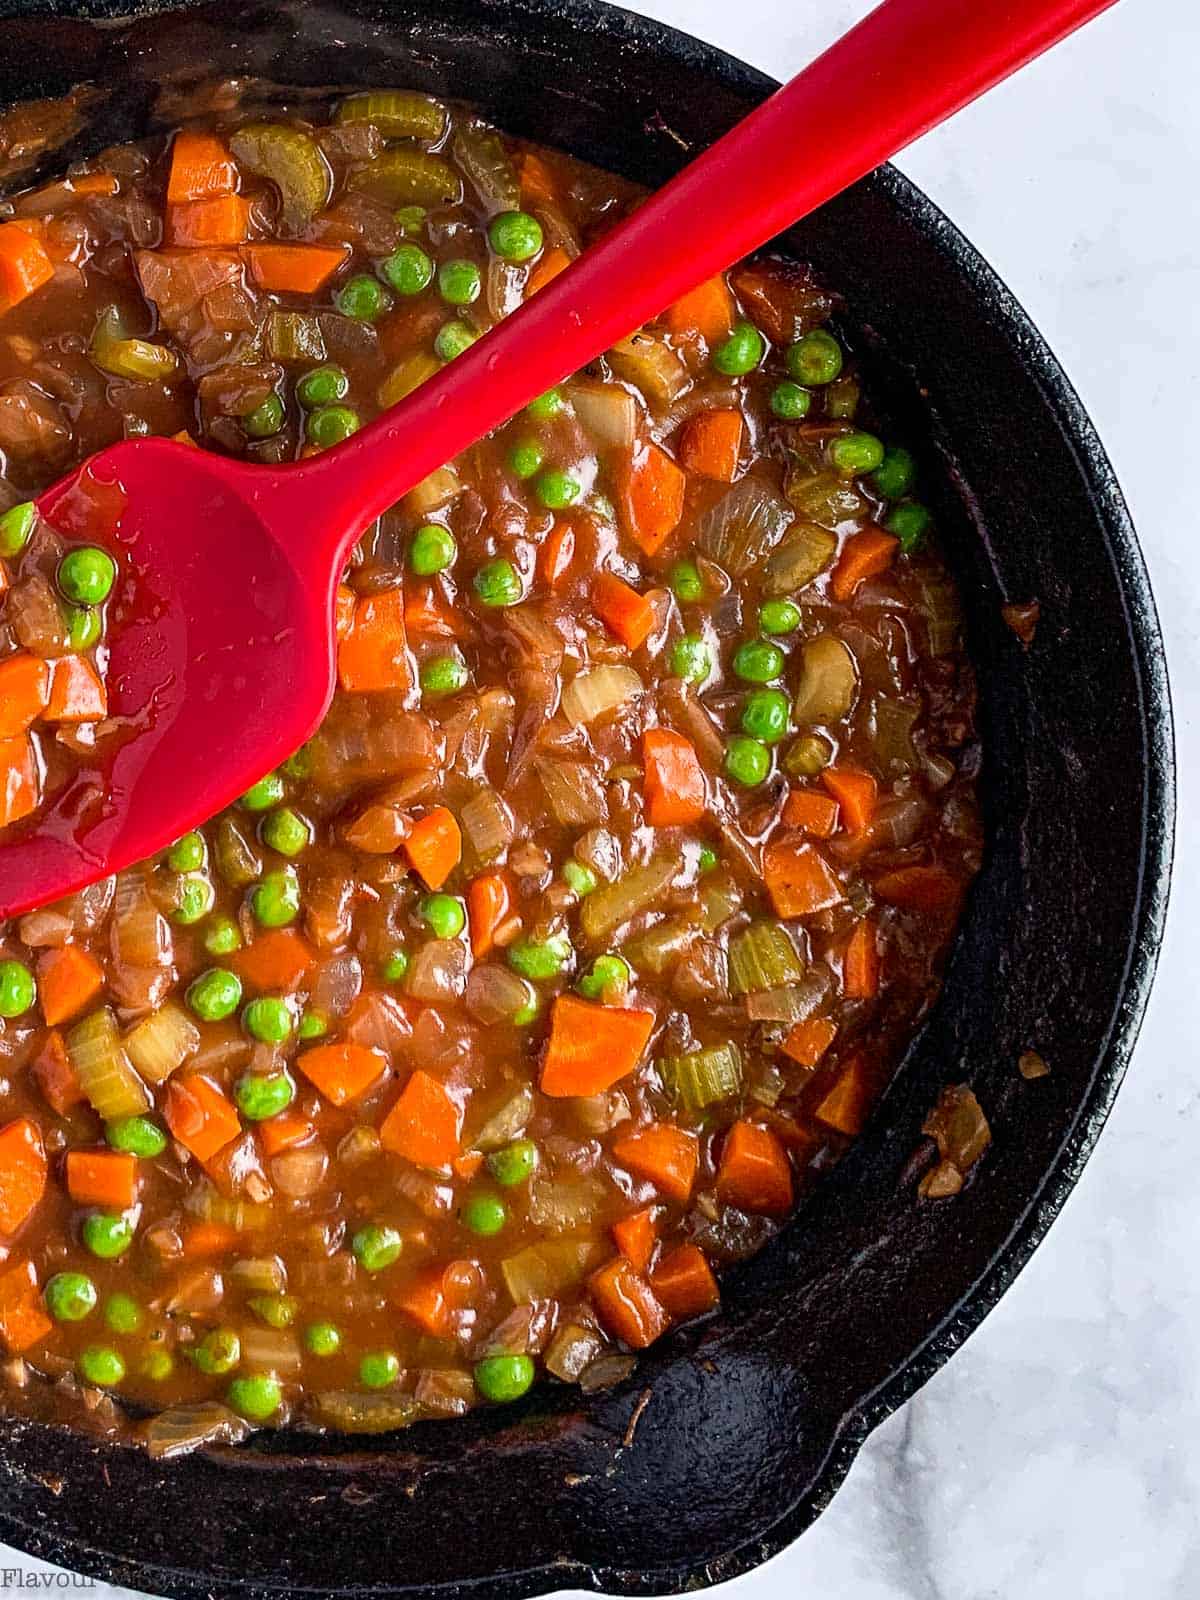 Easy Homemade Shepherd's Pie filling in a cast iron skillet with a red spatula